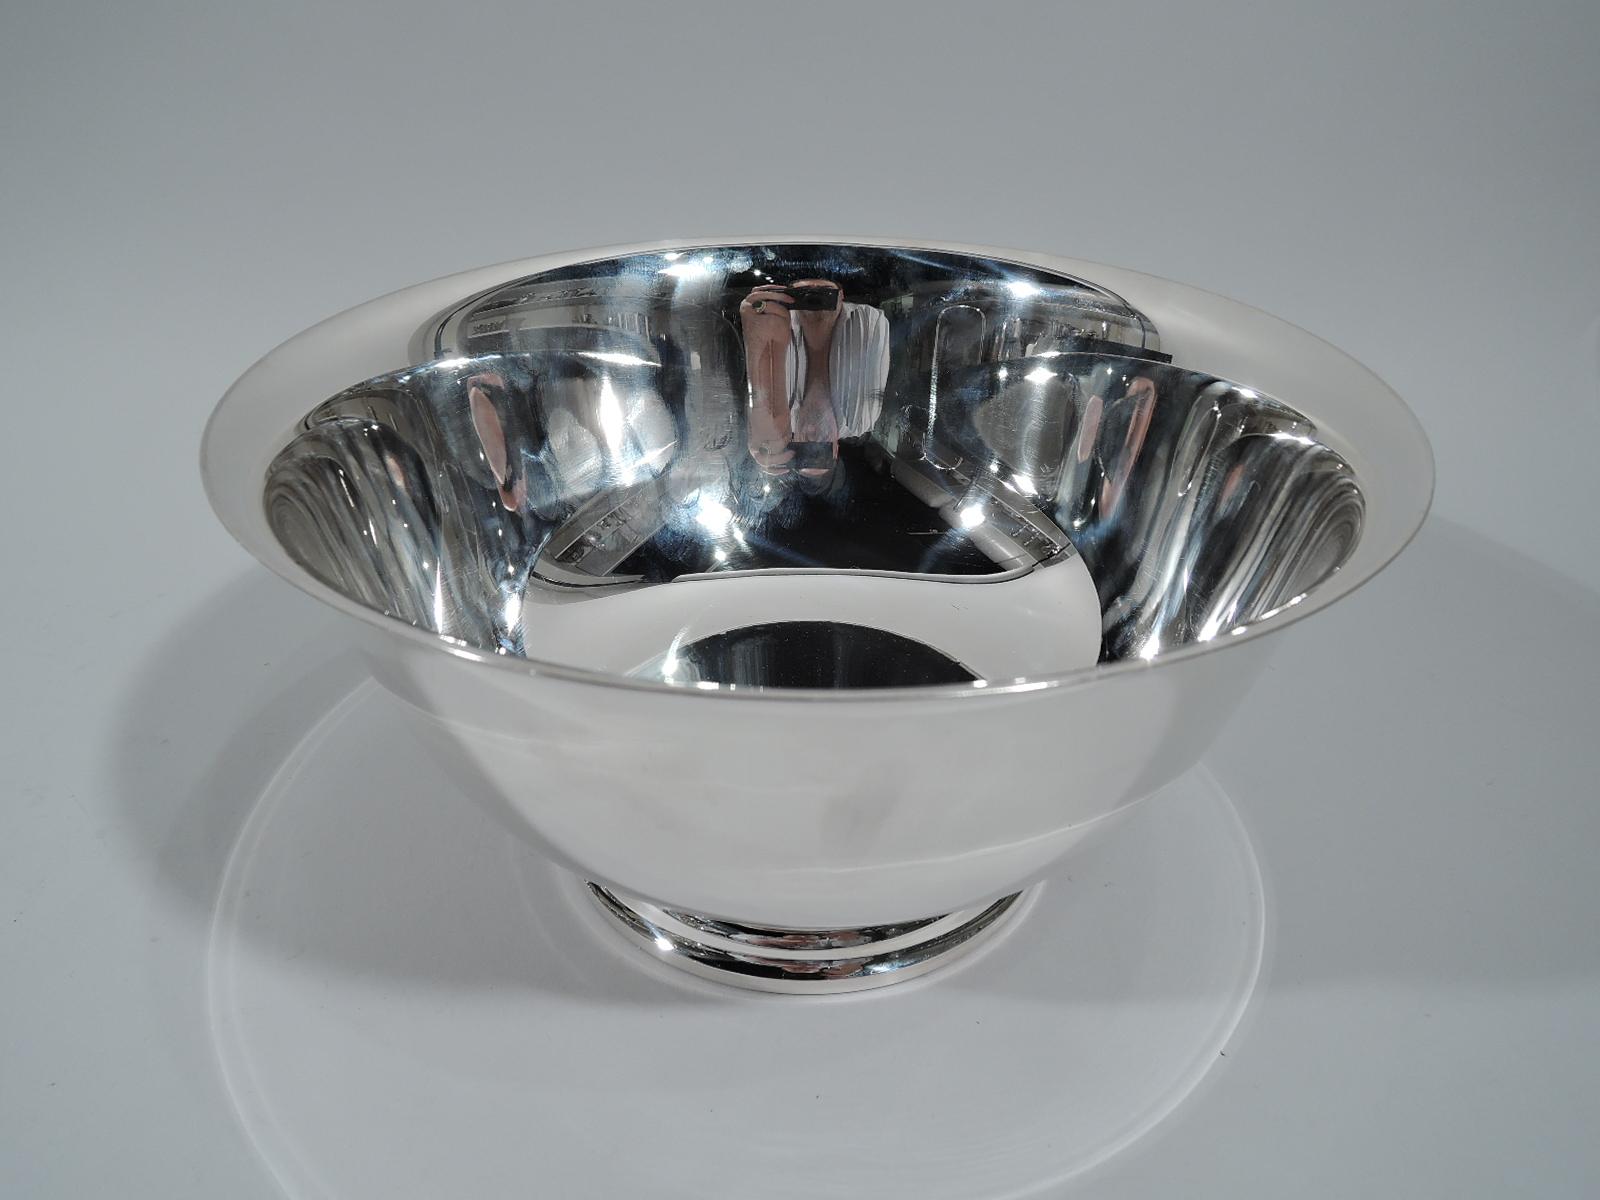 Traditional sterling silver Revere bowl. Made by Gorham in Providence in 1957. Curved sides, flared rim, and raised foot. The classic form with lots of room for engraving. Hallmark includes date code, no. 41660, and phrase “P. Revere /